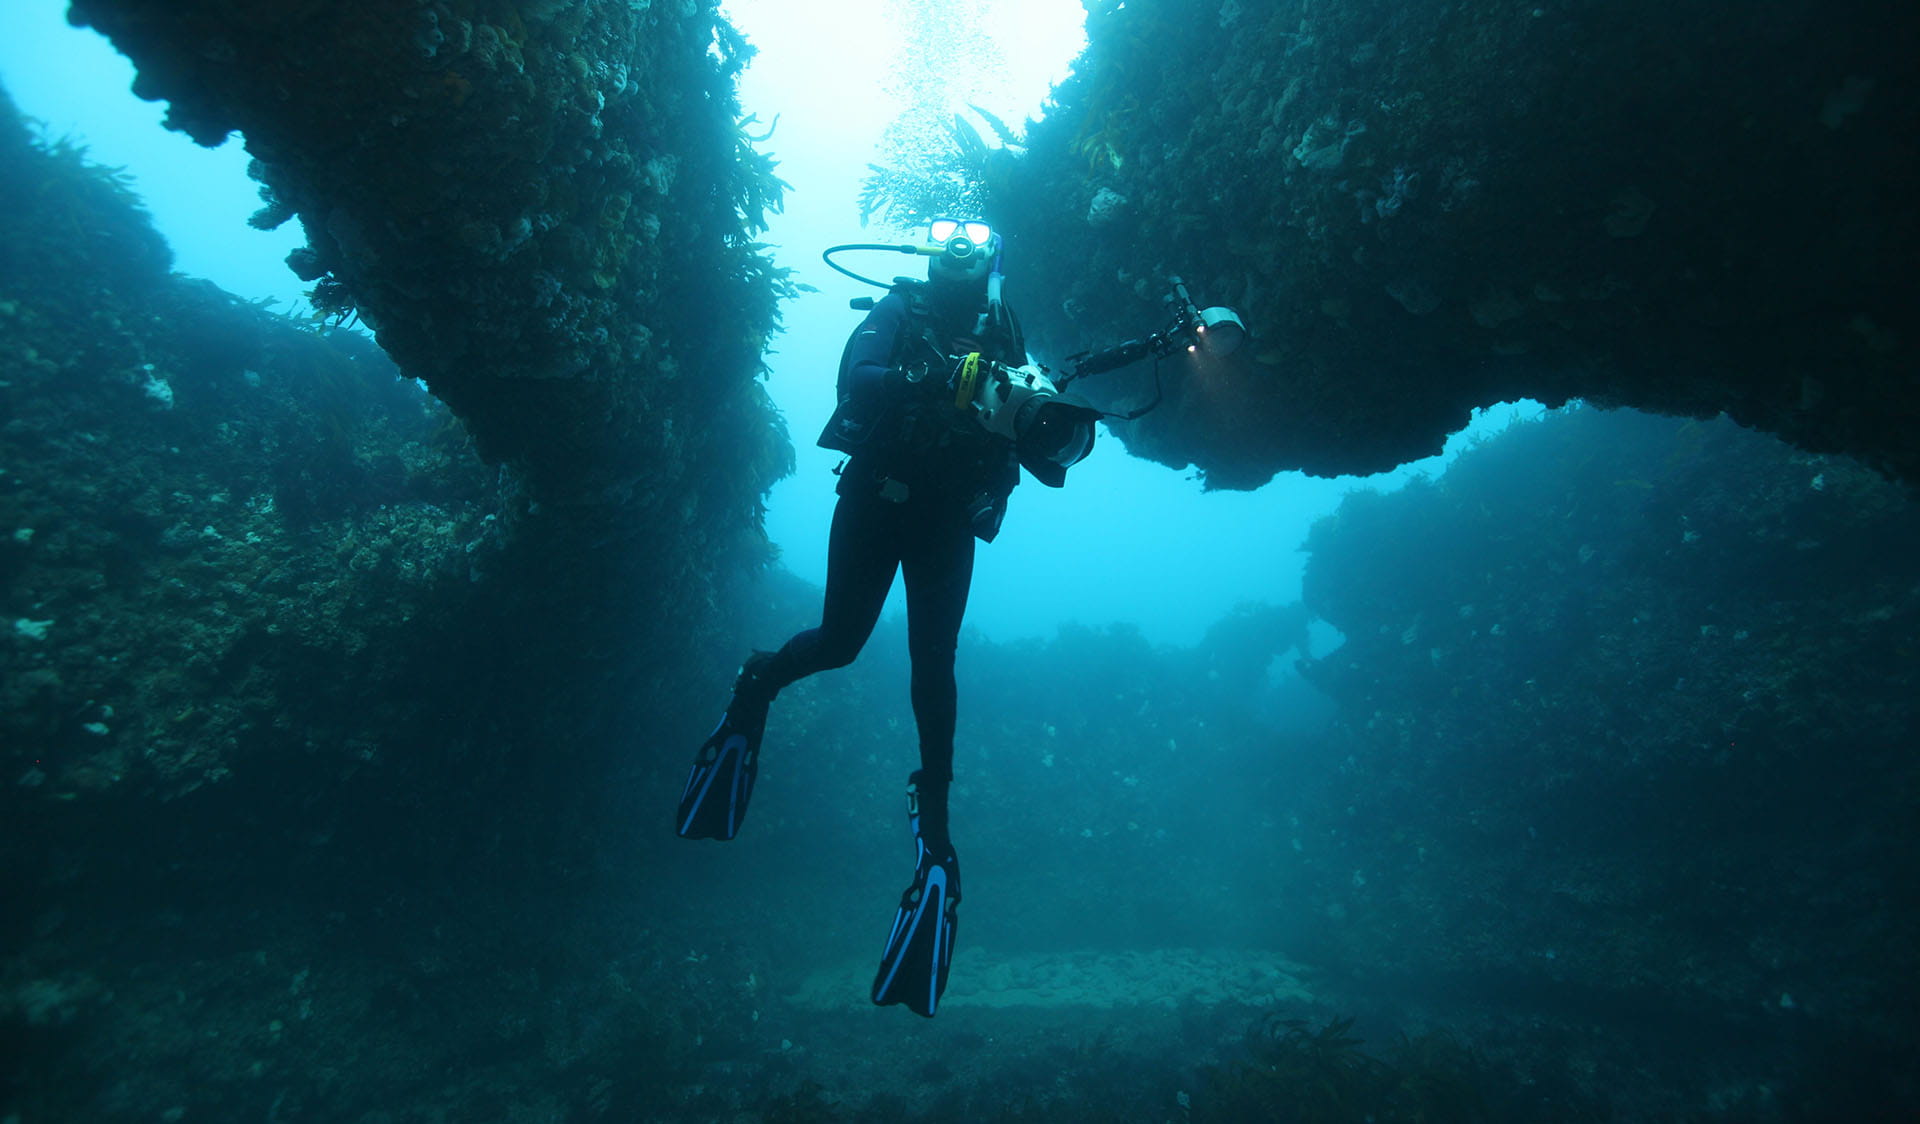 Underwater diver at The Arches